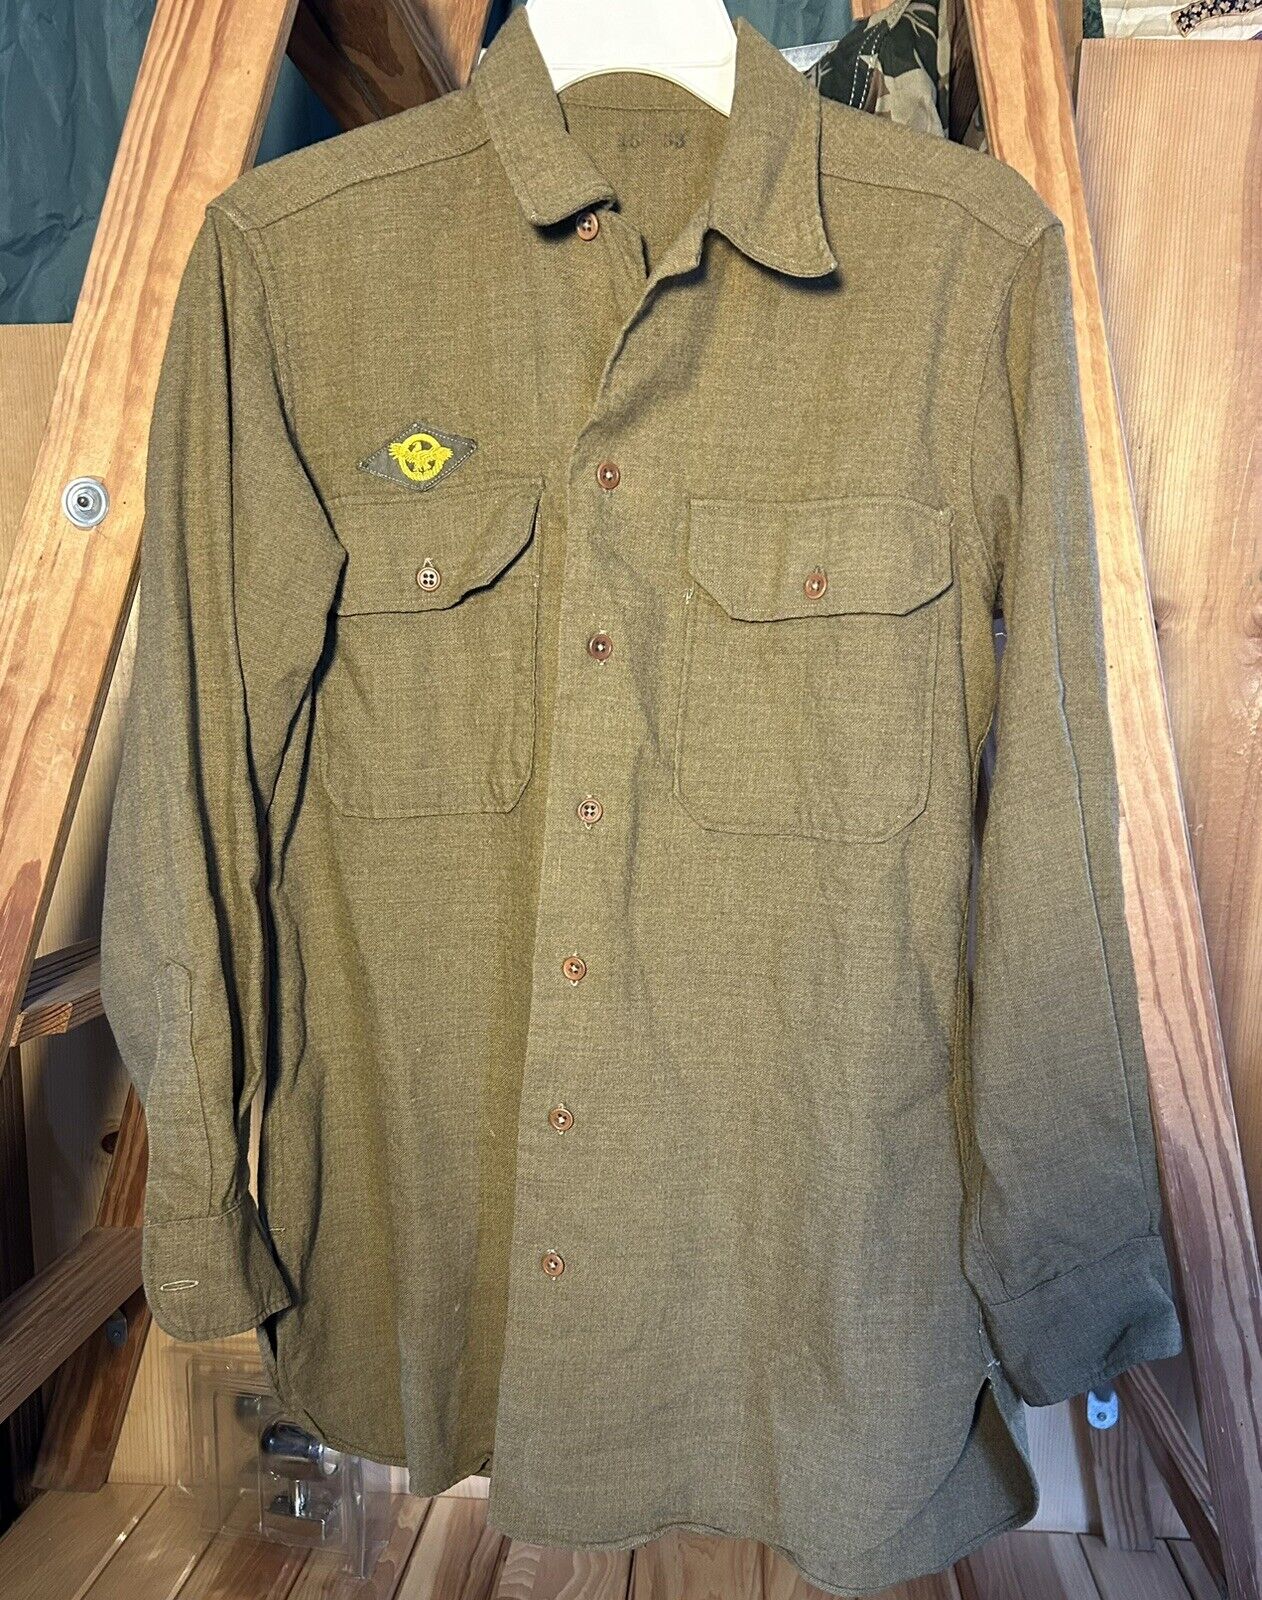 WWII Vintage Wool Shirt W/Ruptured Duck Honorable Discharge Patch As 15-33 NICE